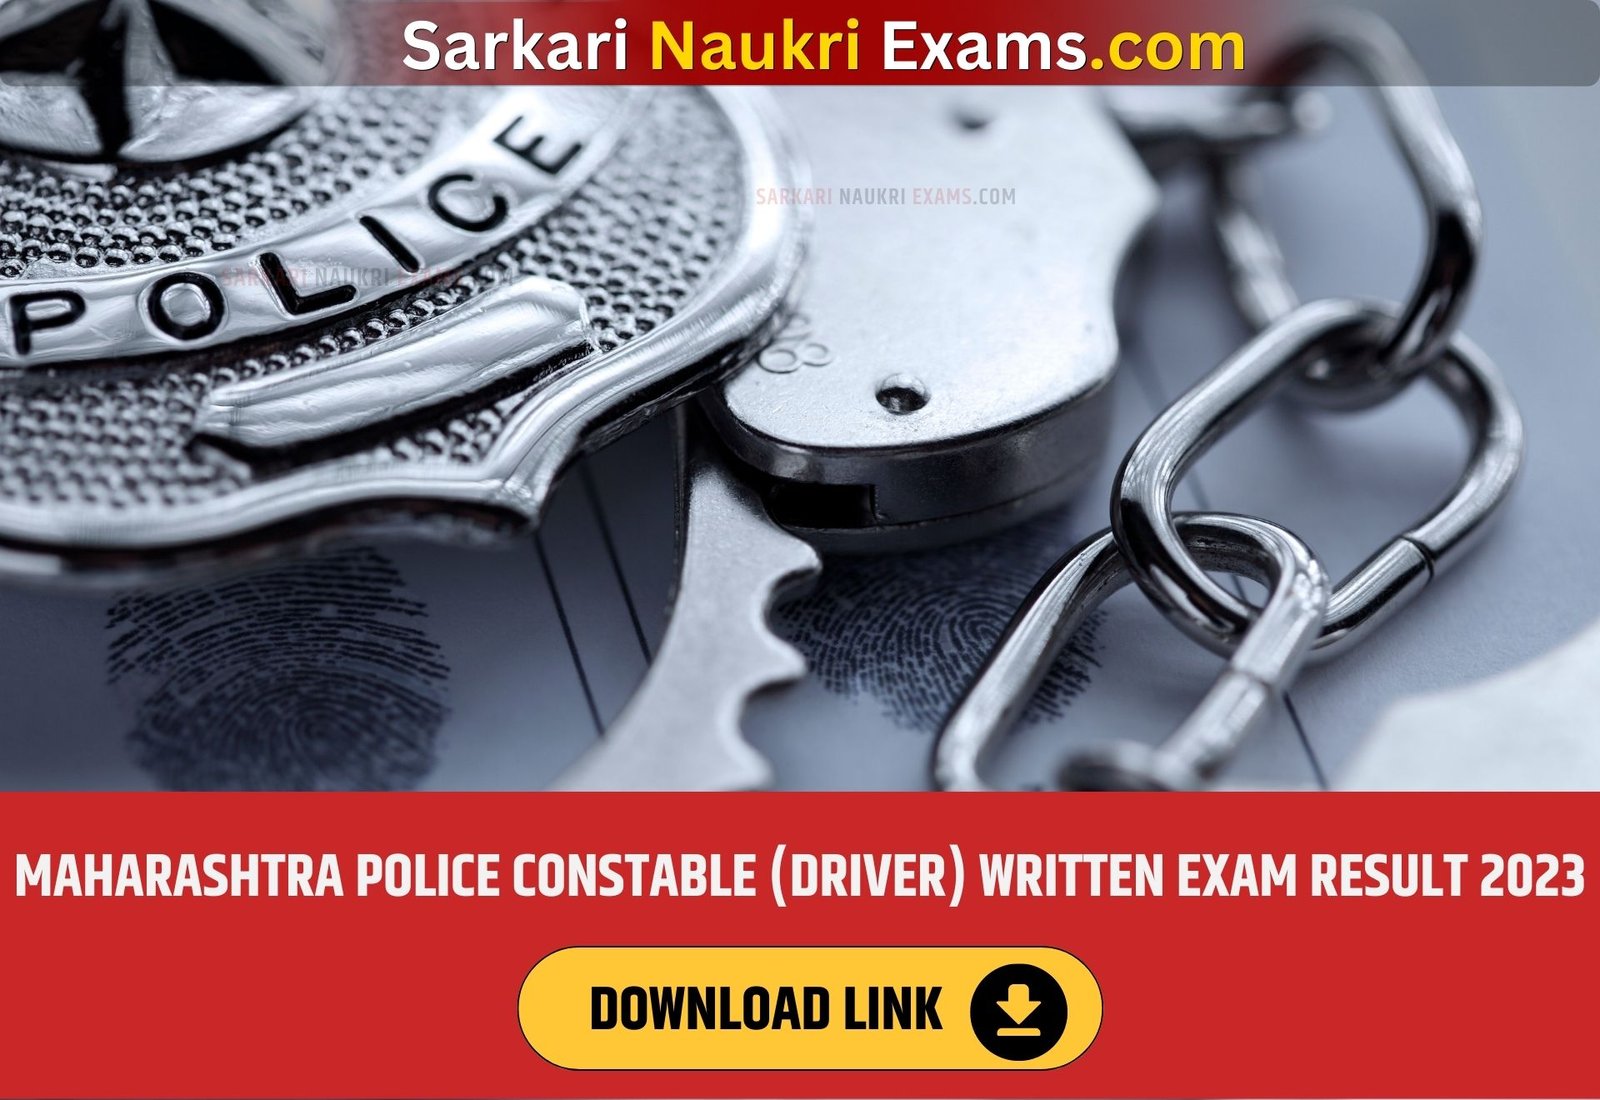 Maharashtra Police Constable (Driver) Written Exam Result 2023 | Download Link, Cut Off